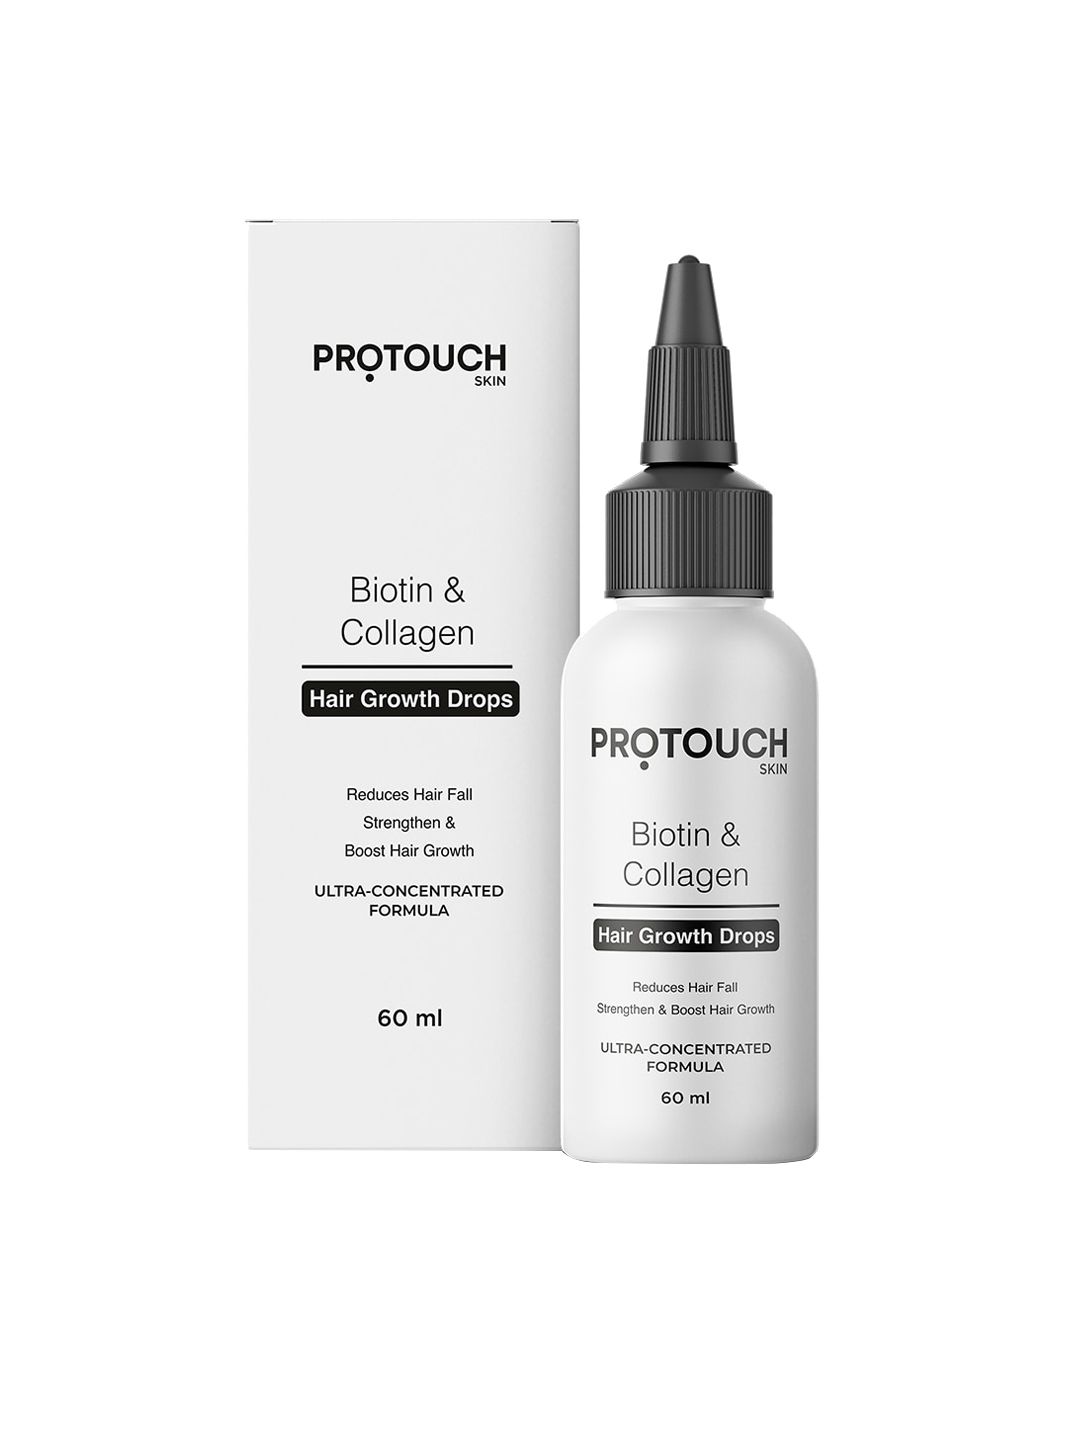 PROTOUCH Biotin & Collagen Hair Growth Drops 60ml Price in India